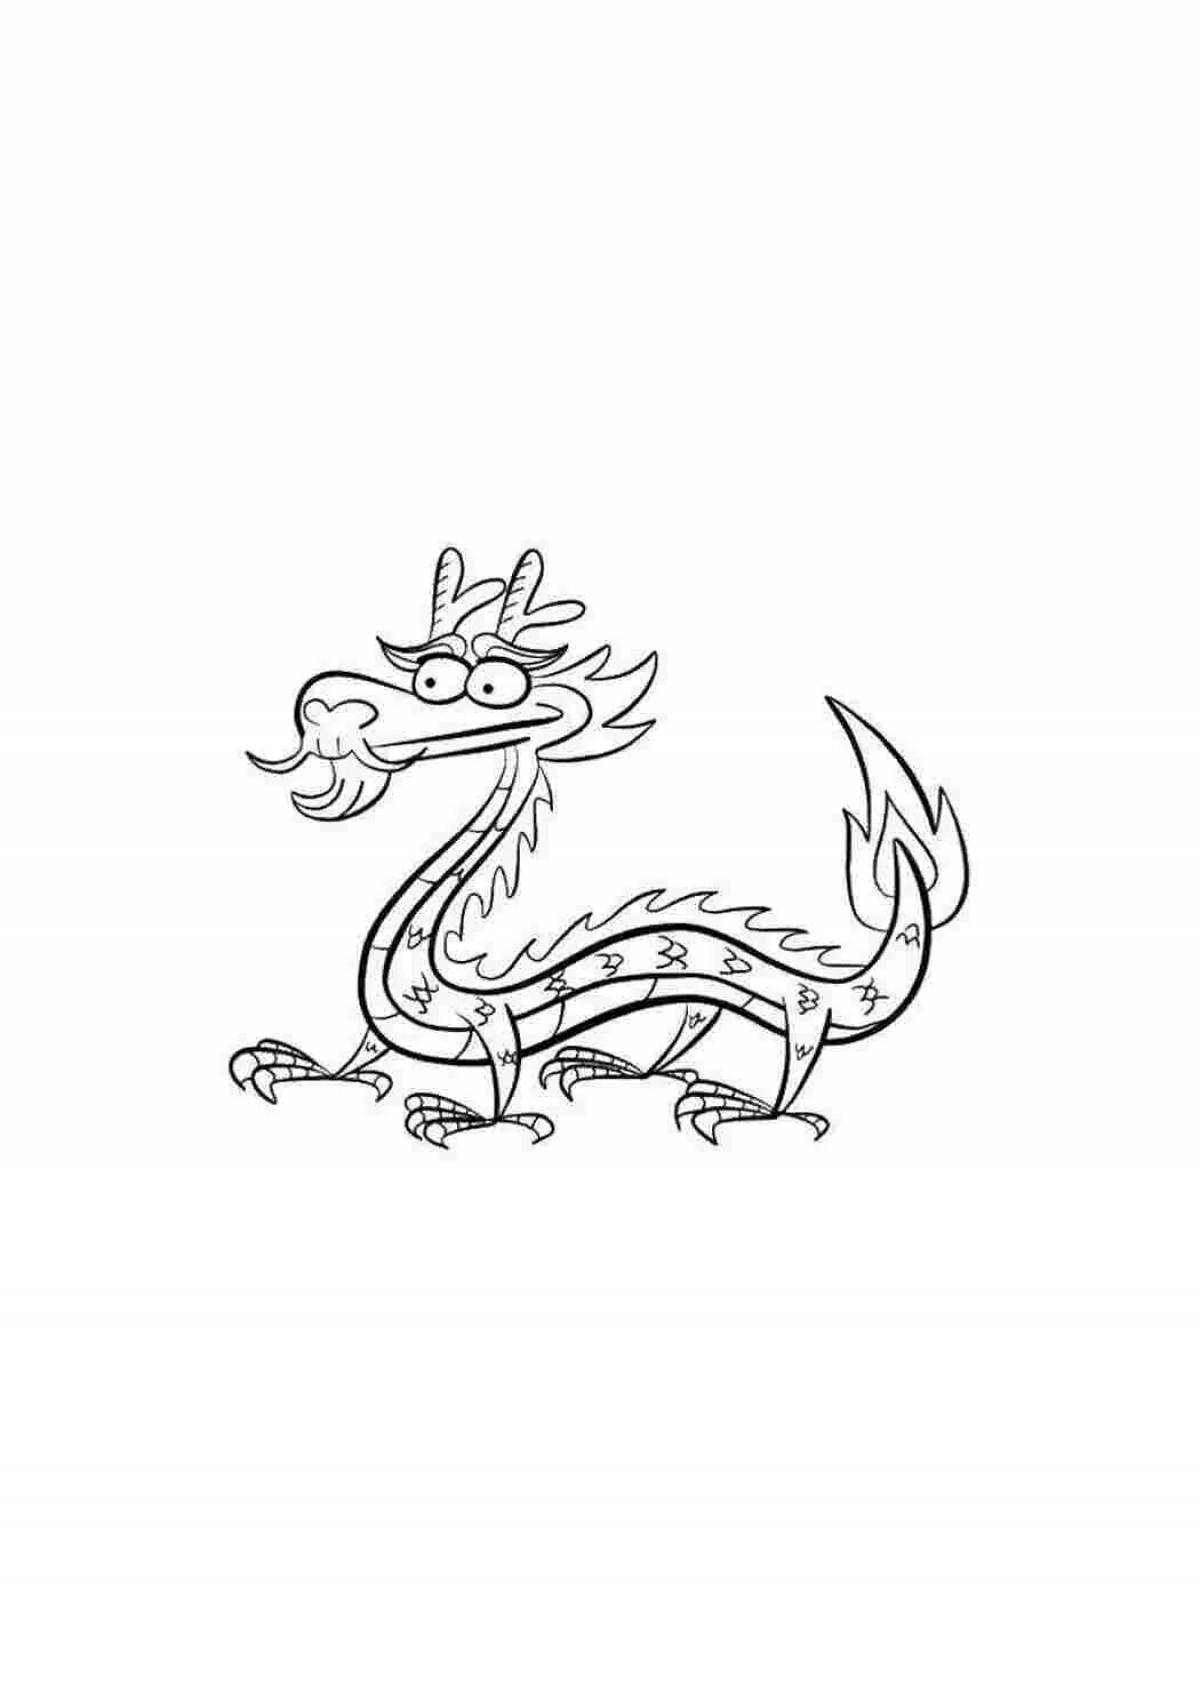 Exciting Chinese dragon coloring book for kids